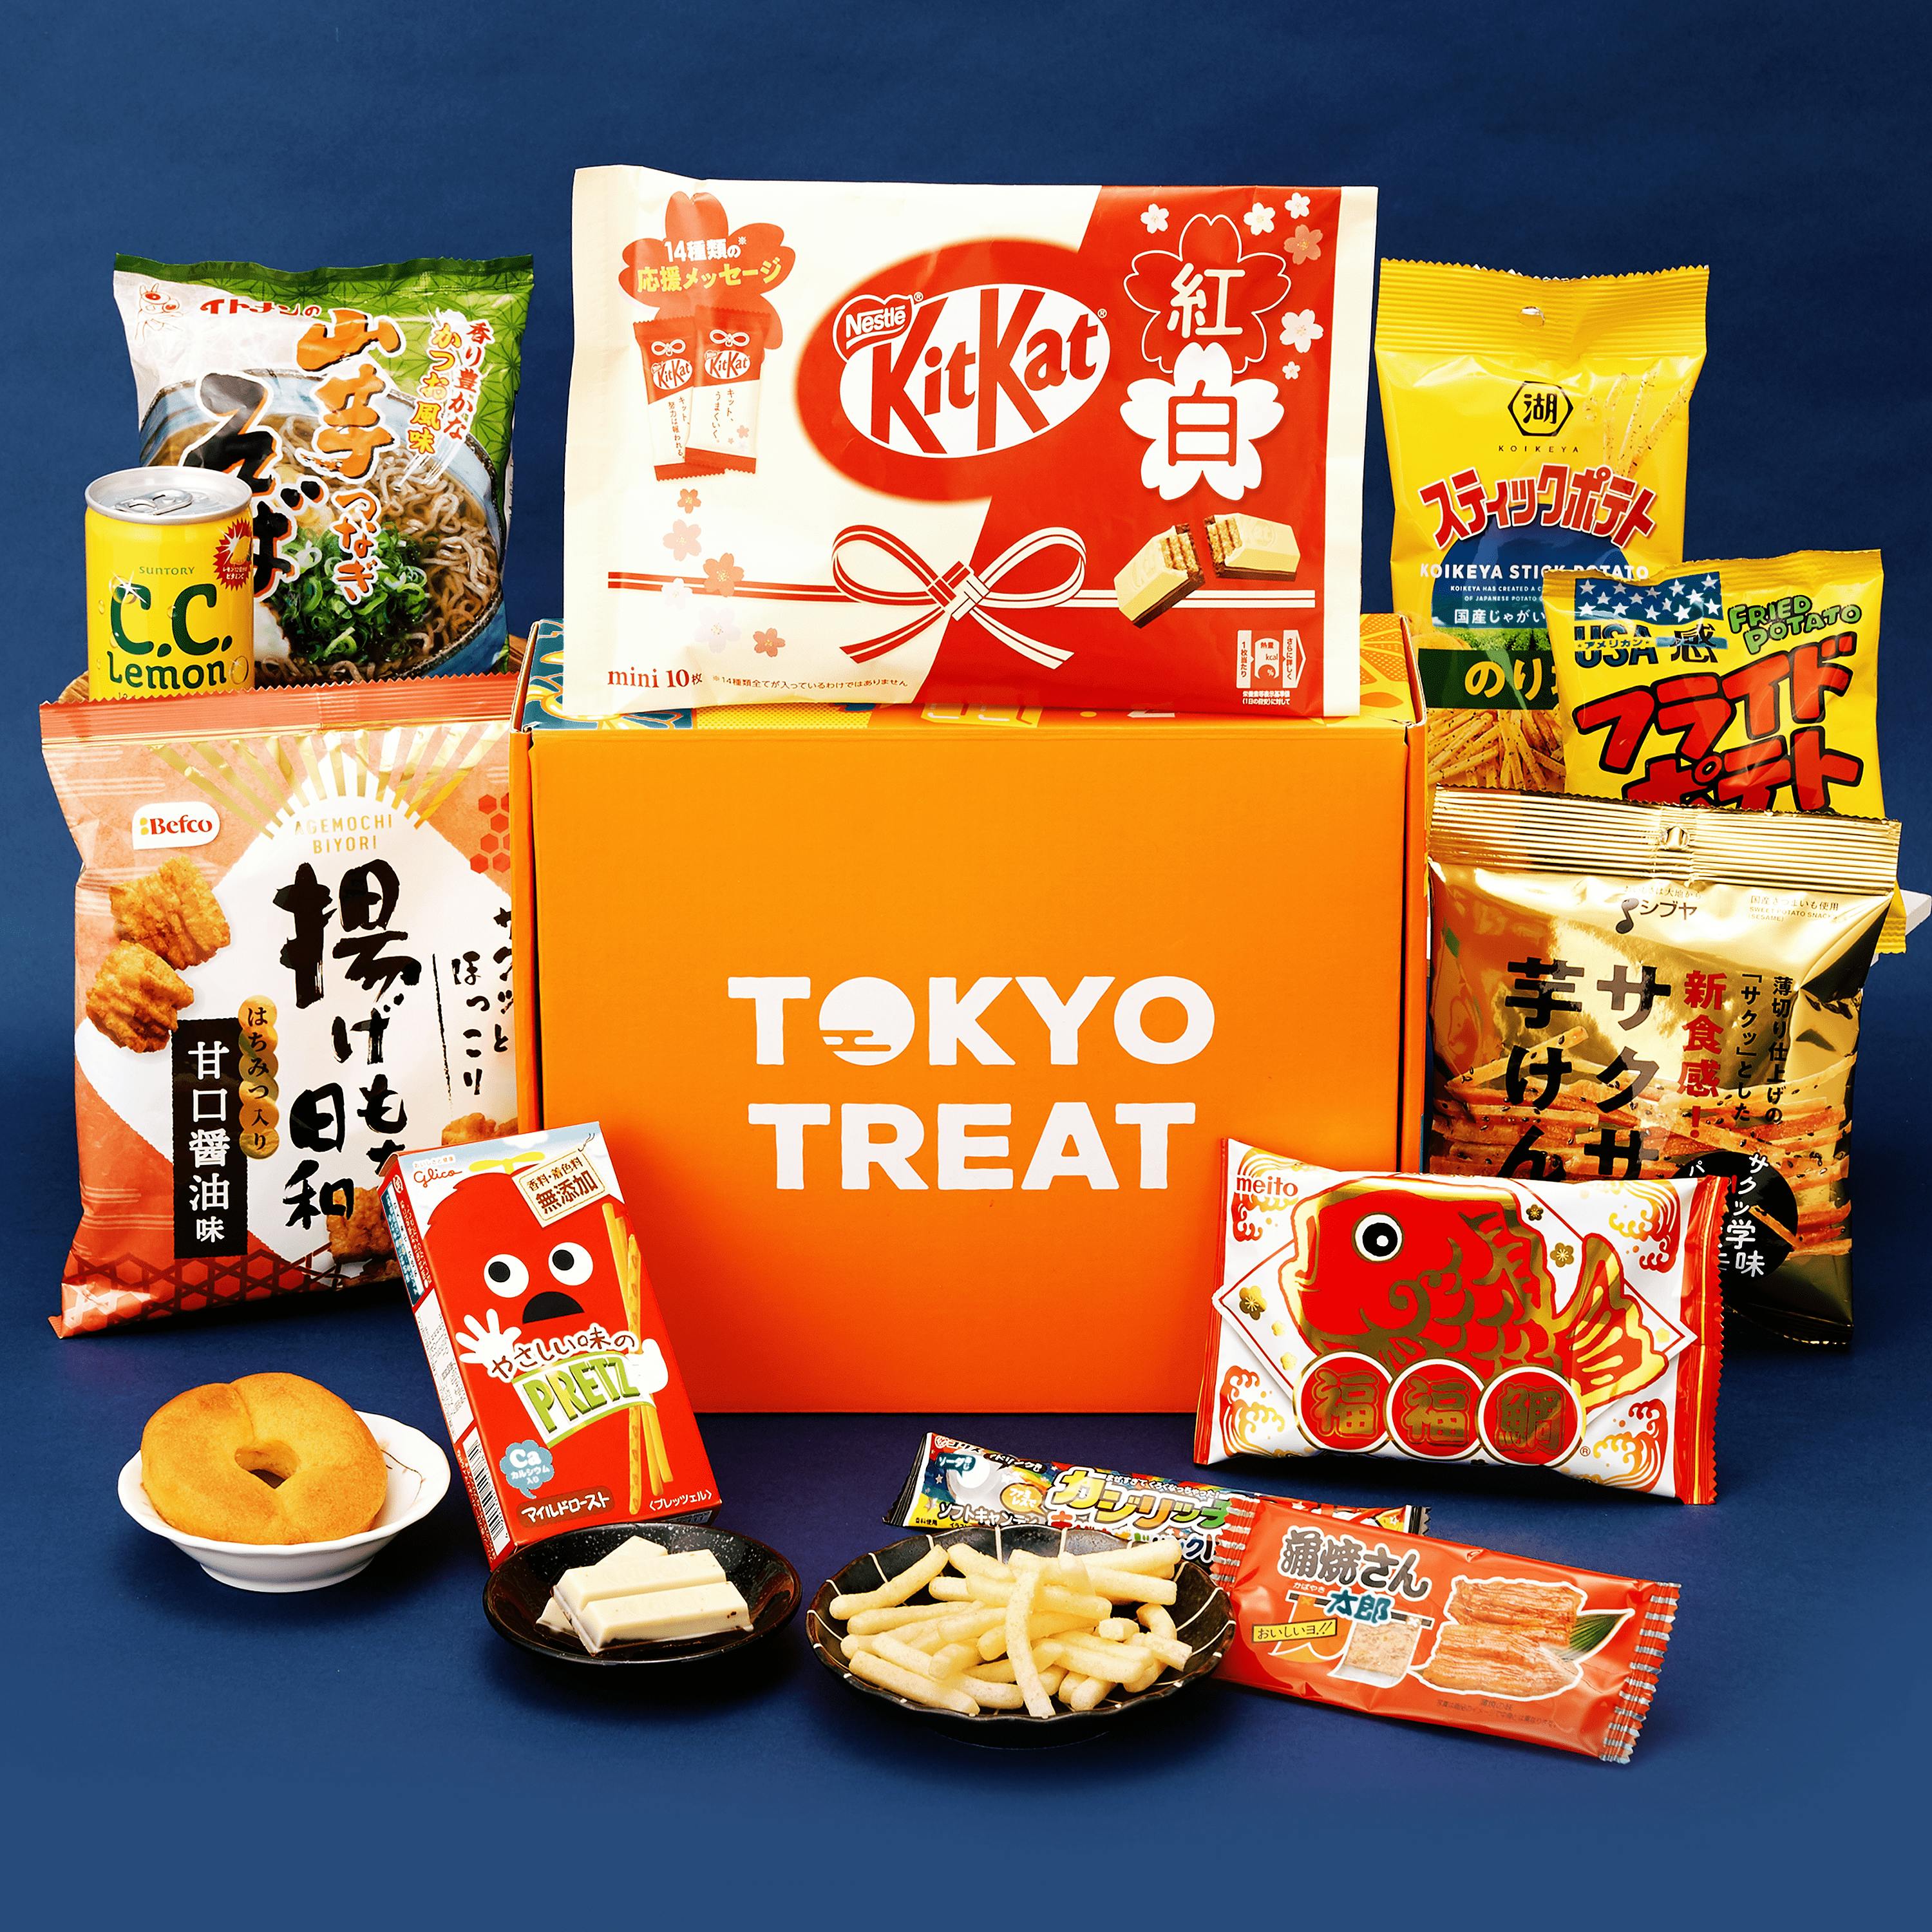 The TokyoTreat New Year's box sits a dark blue background surrounded by the box items.